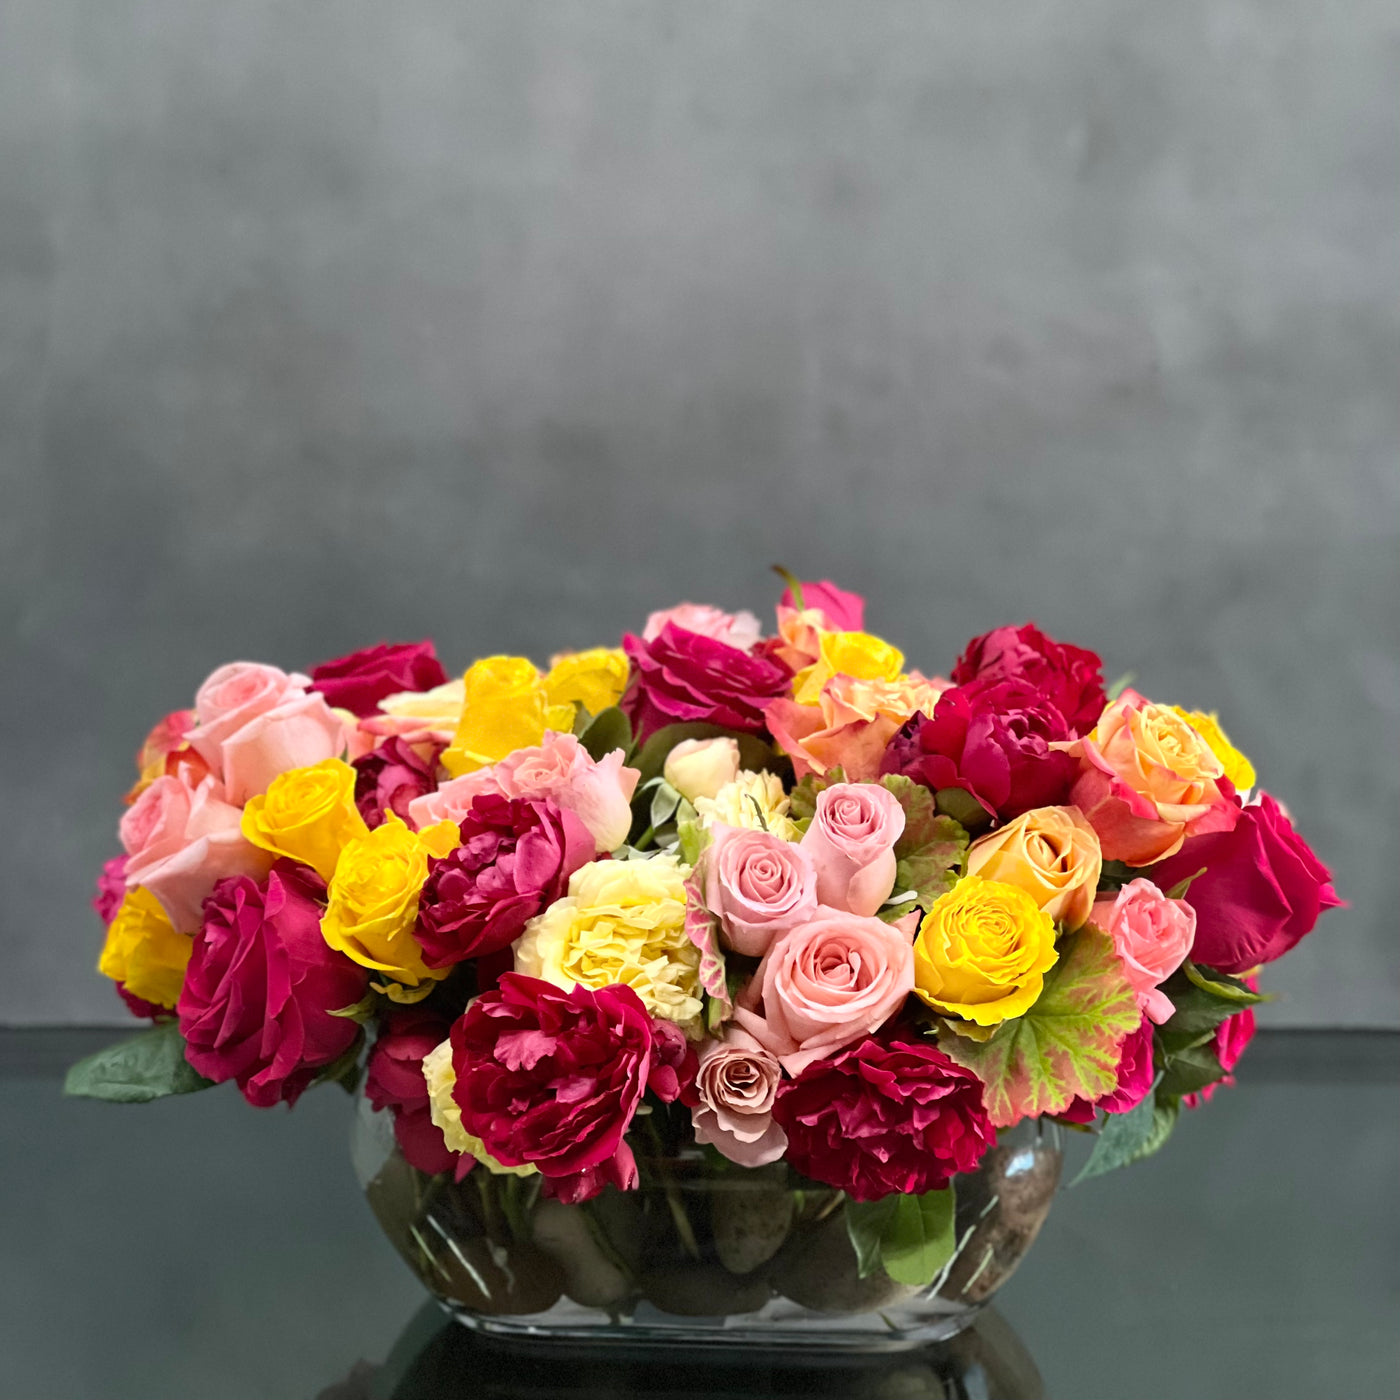 Beverly Hills Florist has True Colors available for same day delivery. This arrangement of colorful roses in an oval glass vase is a wonderful gift, sure to brighten day and lift spirits.. Includes, Hot Pink Roses, Yellow Roses, Pink Roses, Baby Peonies and other various greens. Perfect for Birthday flowers, Congratulation Flowers, Welcome homes and more ! 